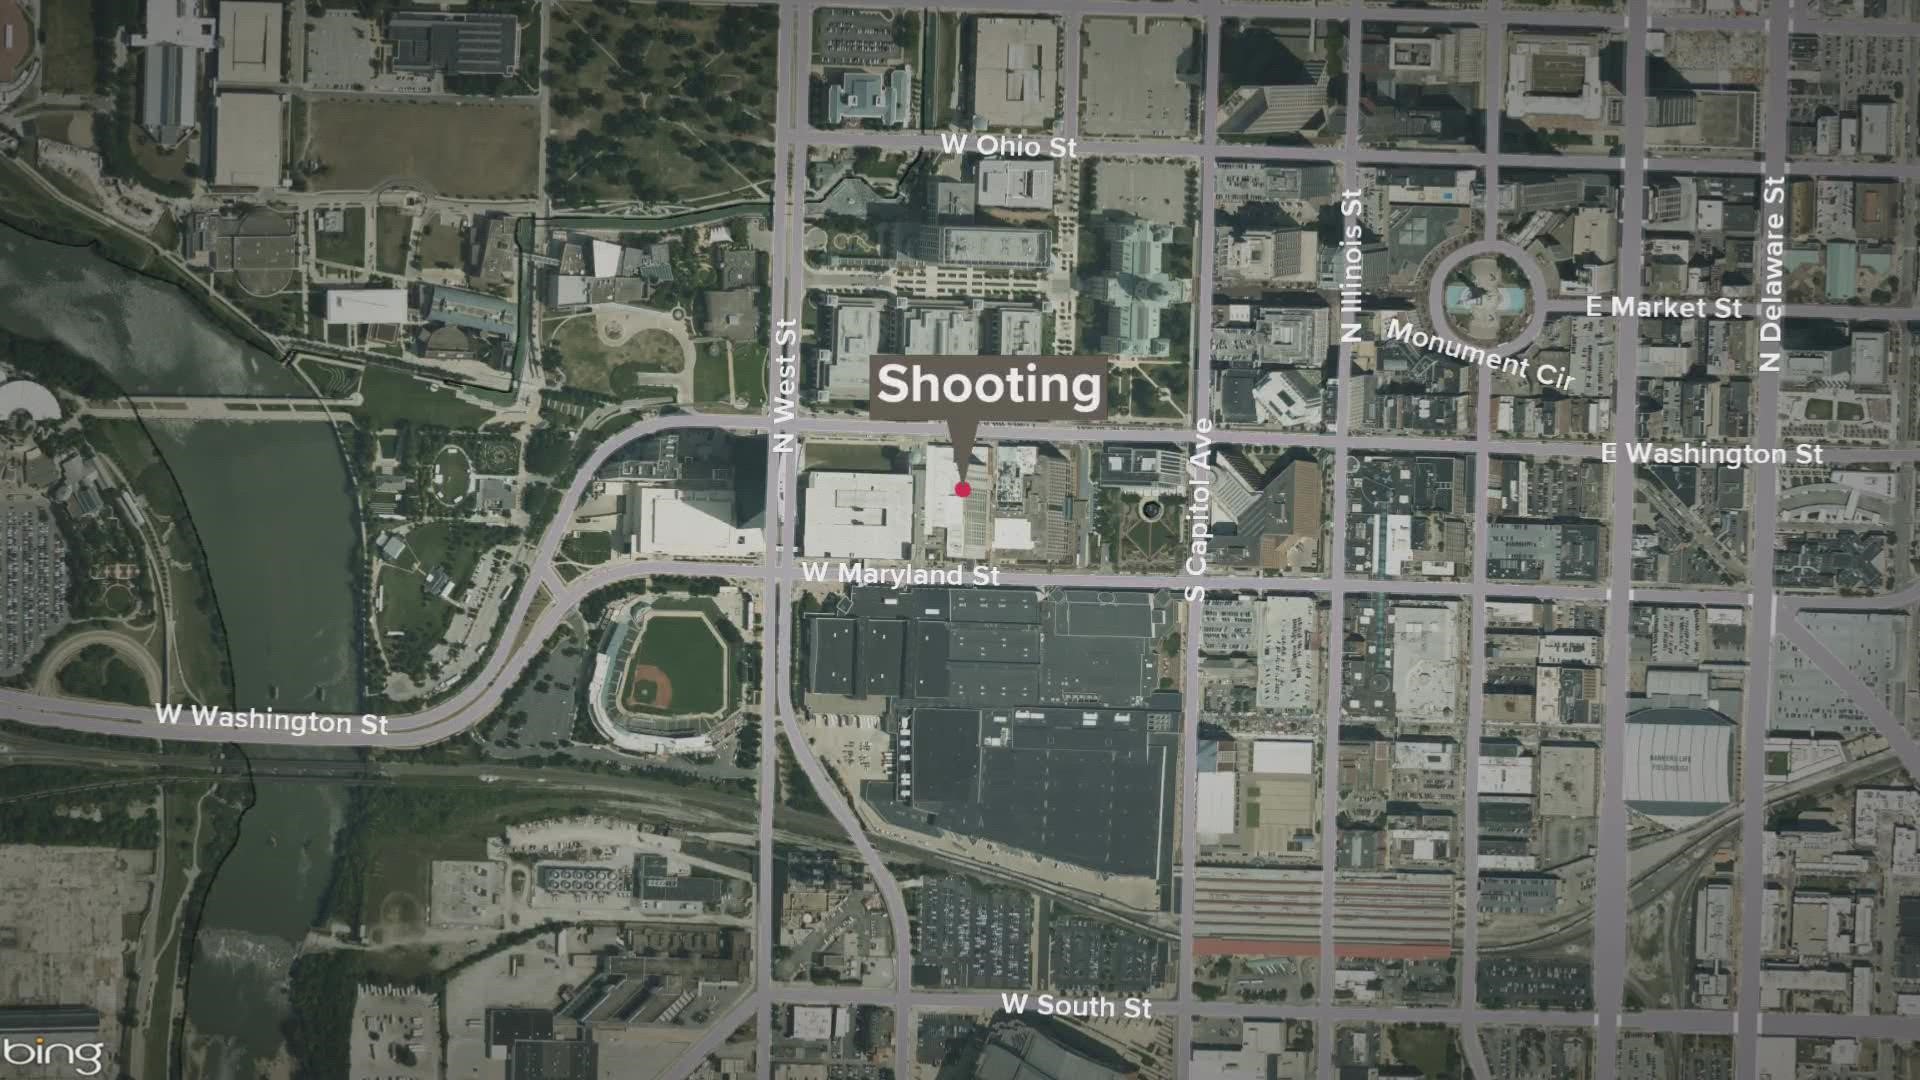 Metro Police say a man was shot and seriously hurt near a hotel in downtown Indianapolis early Saturday.